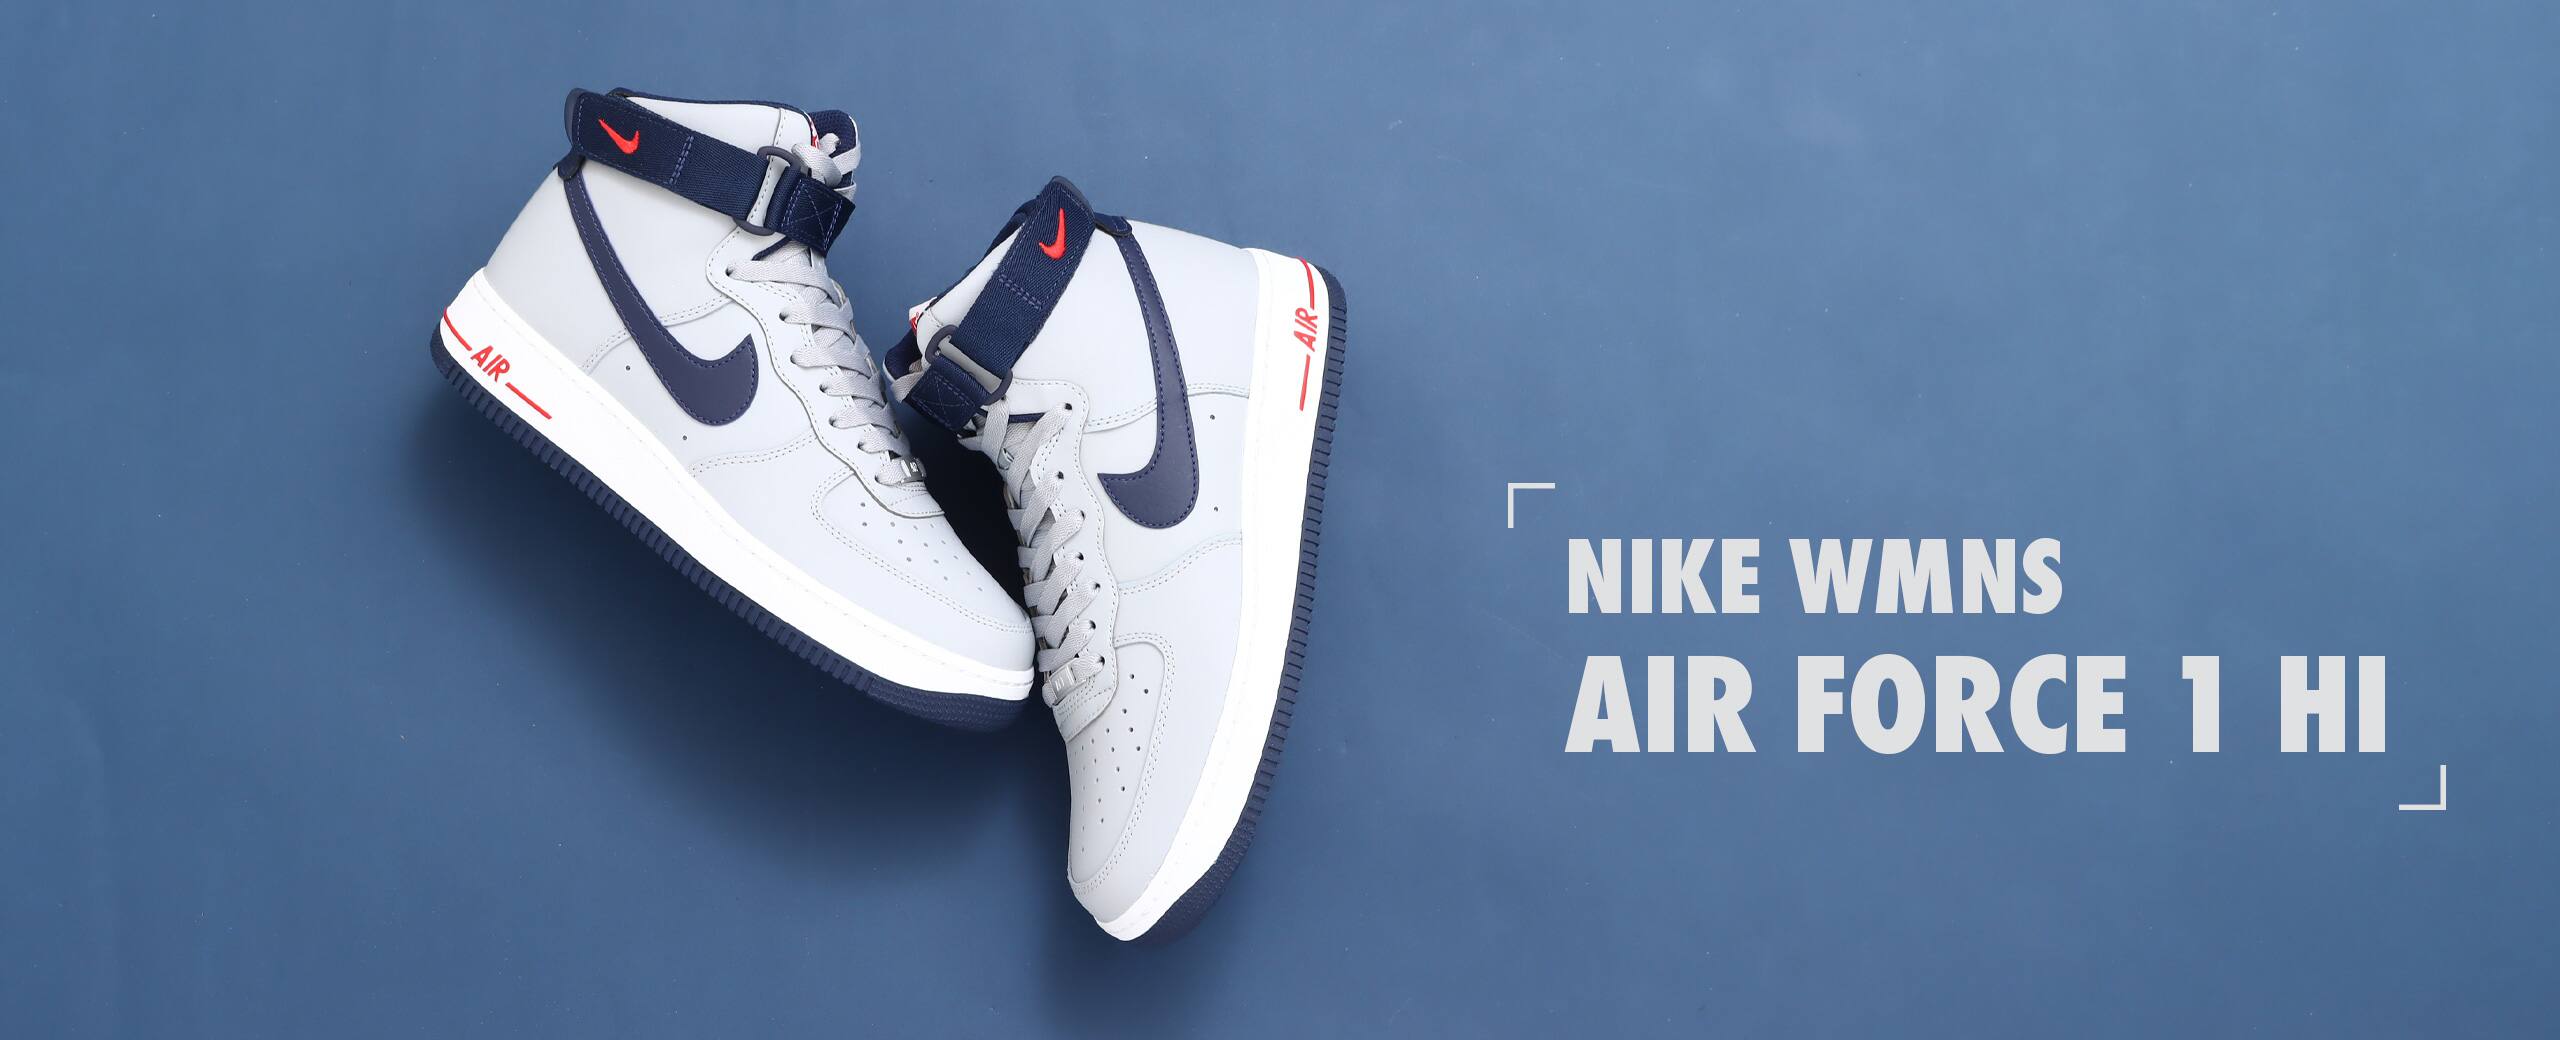 NIKE WMNS AIR FORCE 1 HI QS WOLF GREY/COLLEGE NAVY-UNIVERSITY RED 